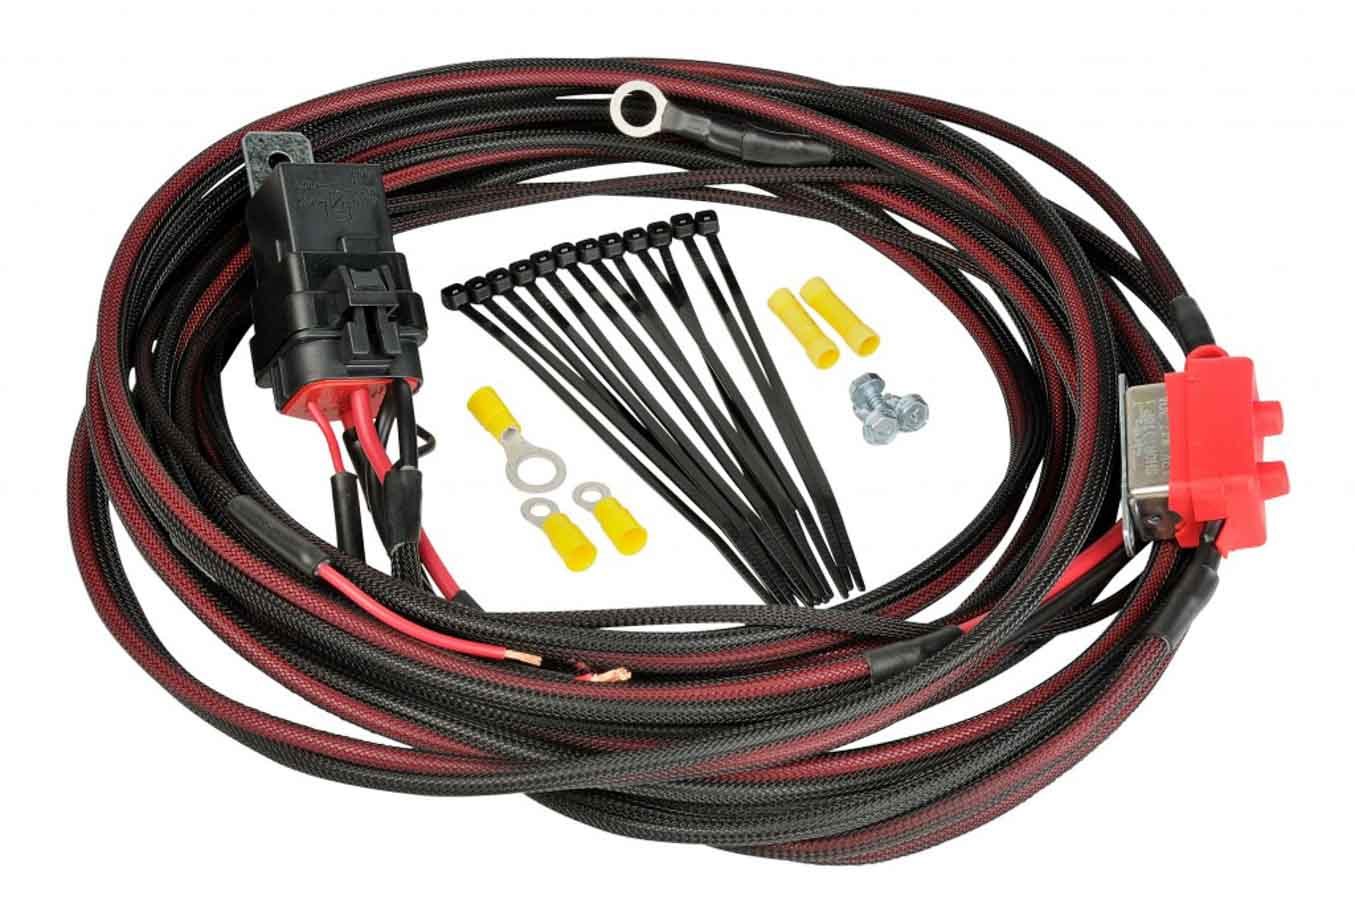 Aeromotive 16307 Fuel Pump Wiring Harness, 30 amp, Connectors / Relay / Wire / Cable Ties, Kit